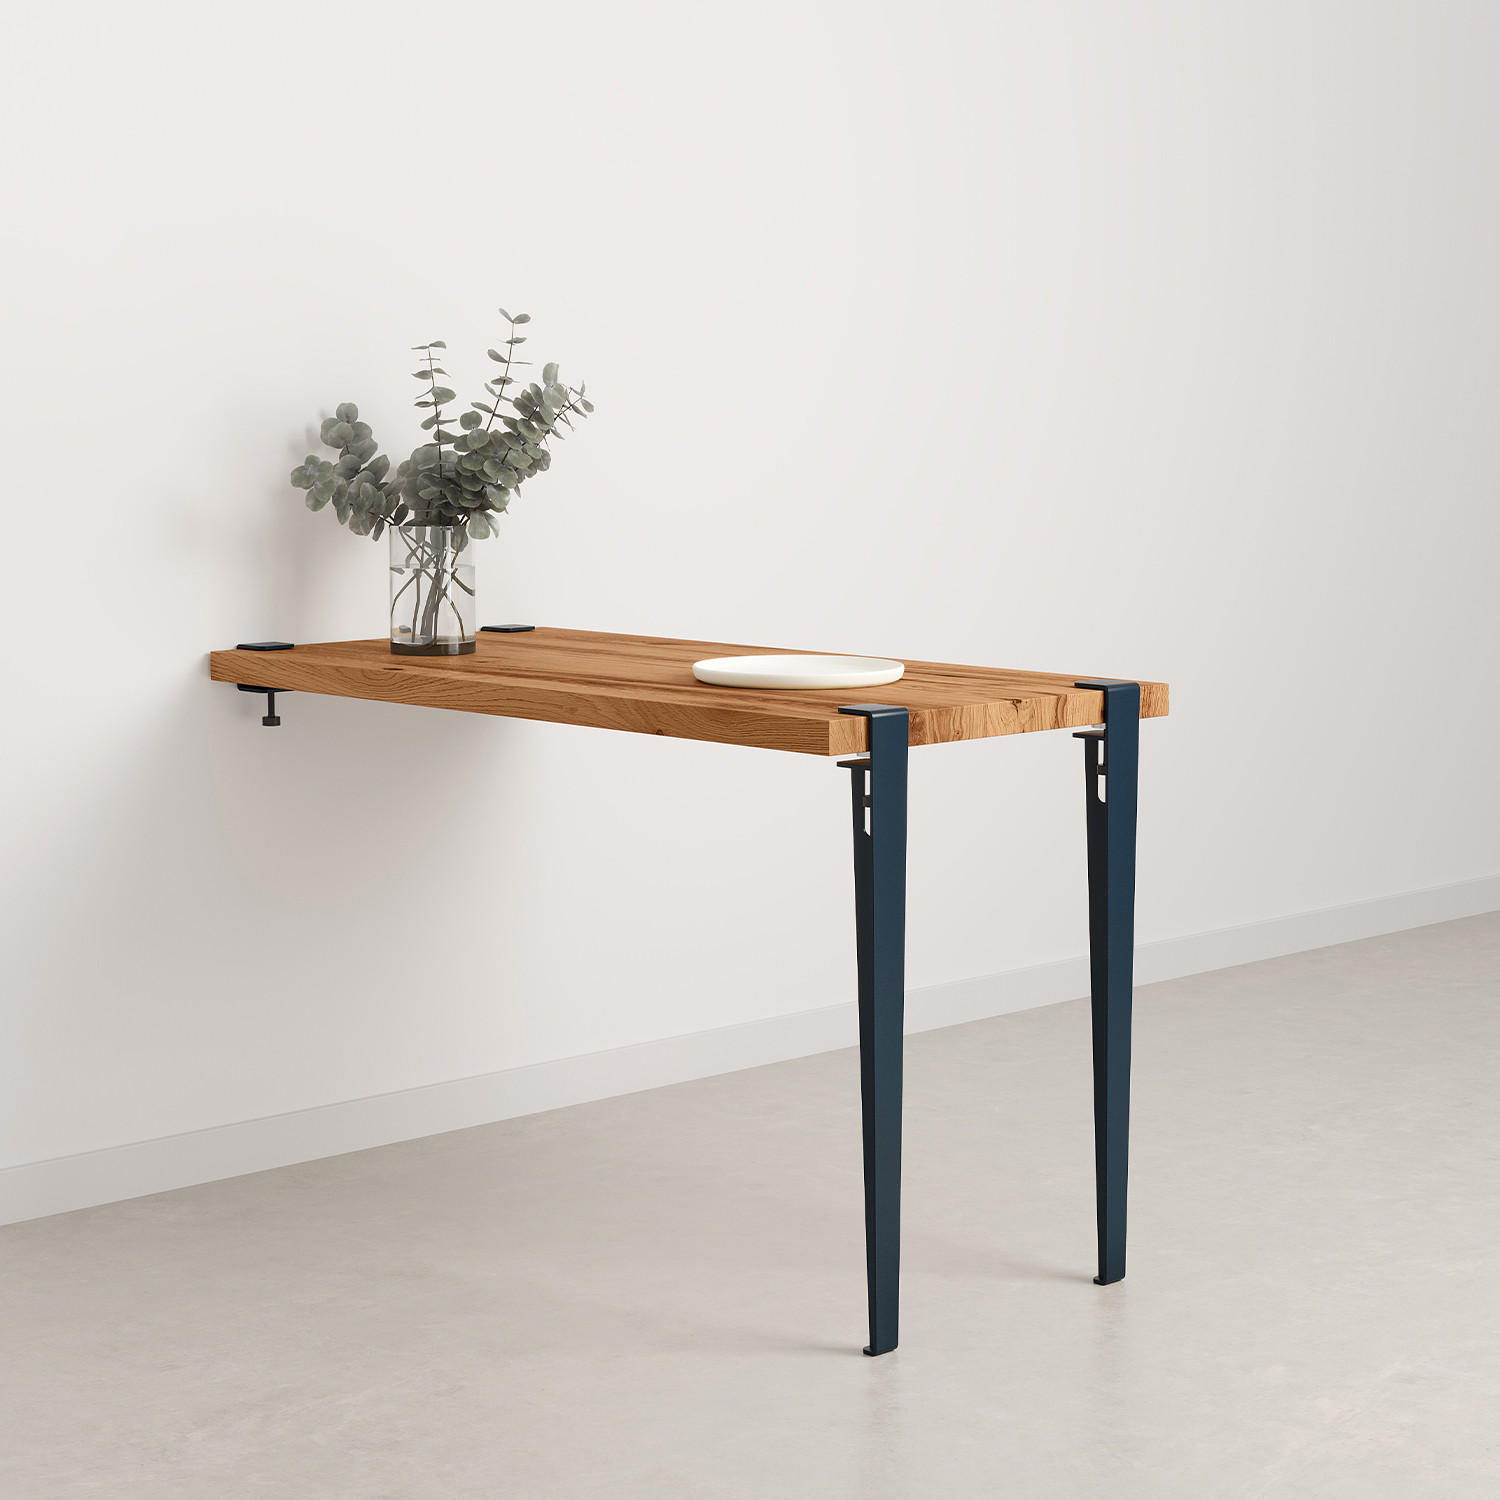 Wall–mounted dining table – height 75cm - reclaimed wood